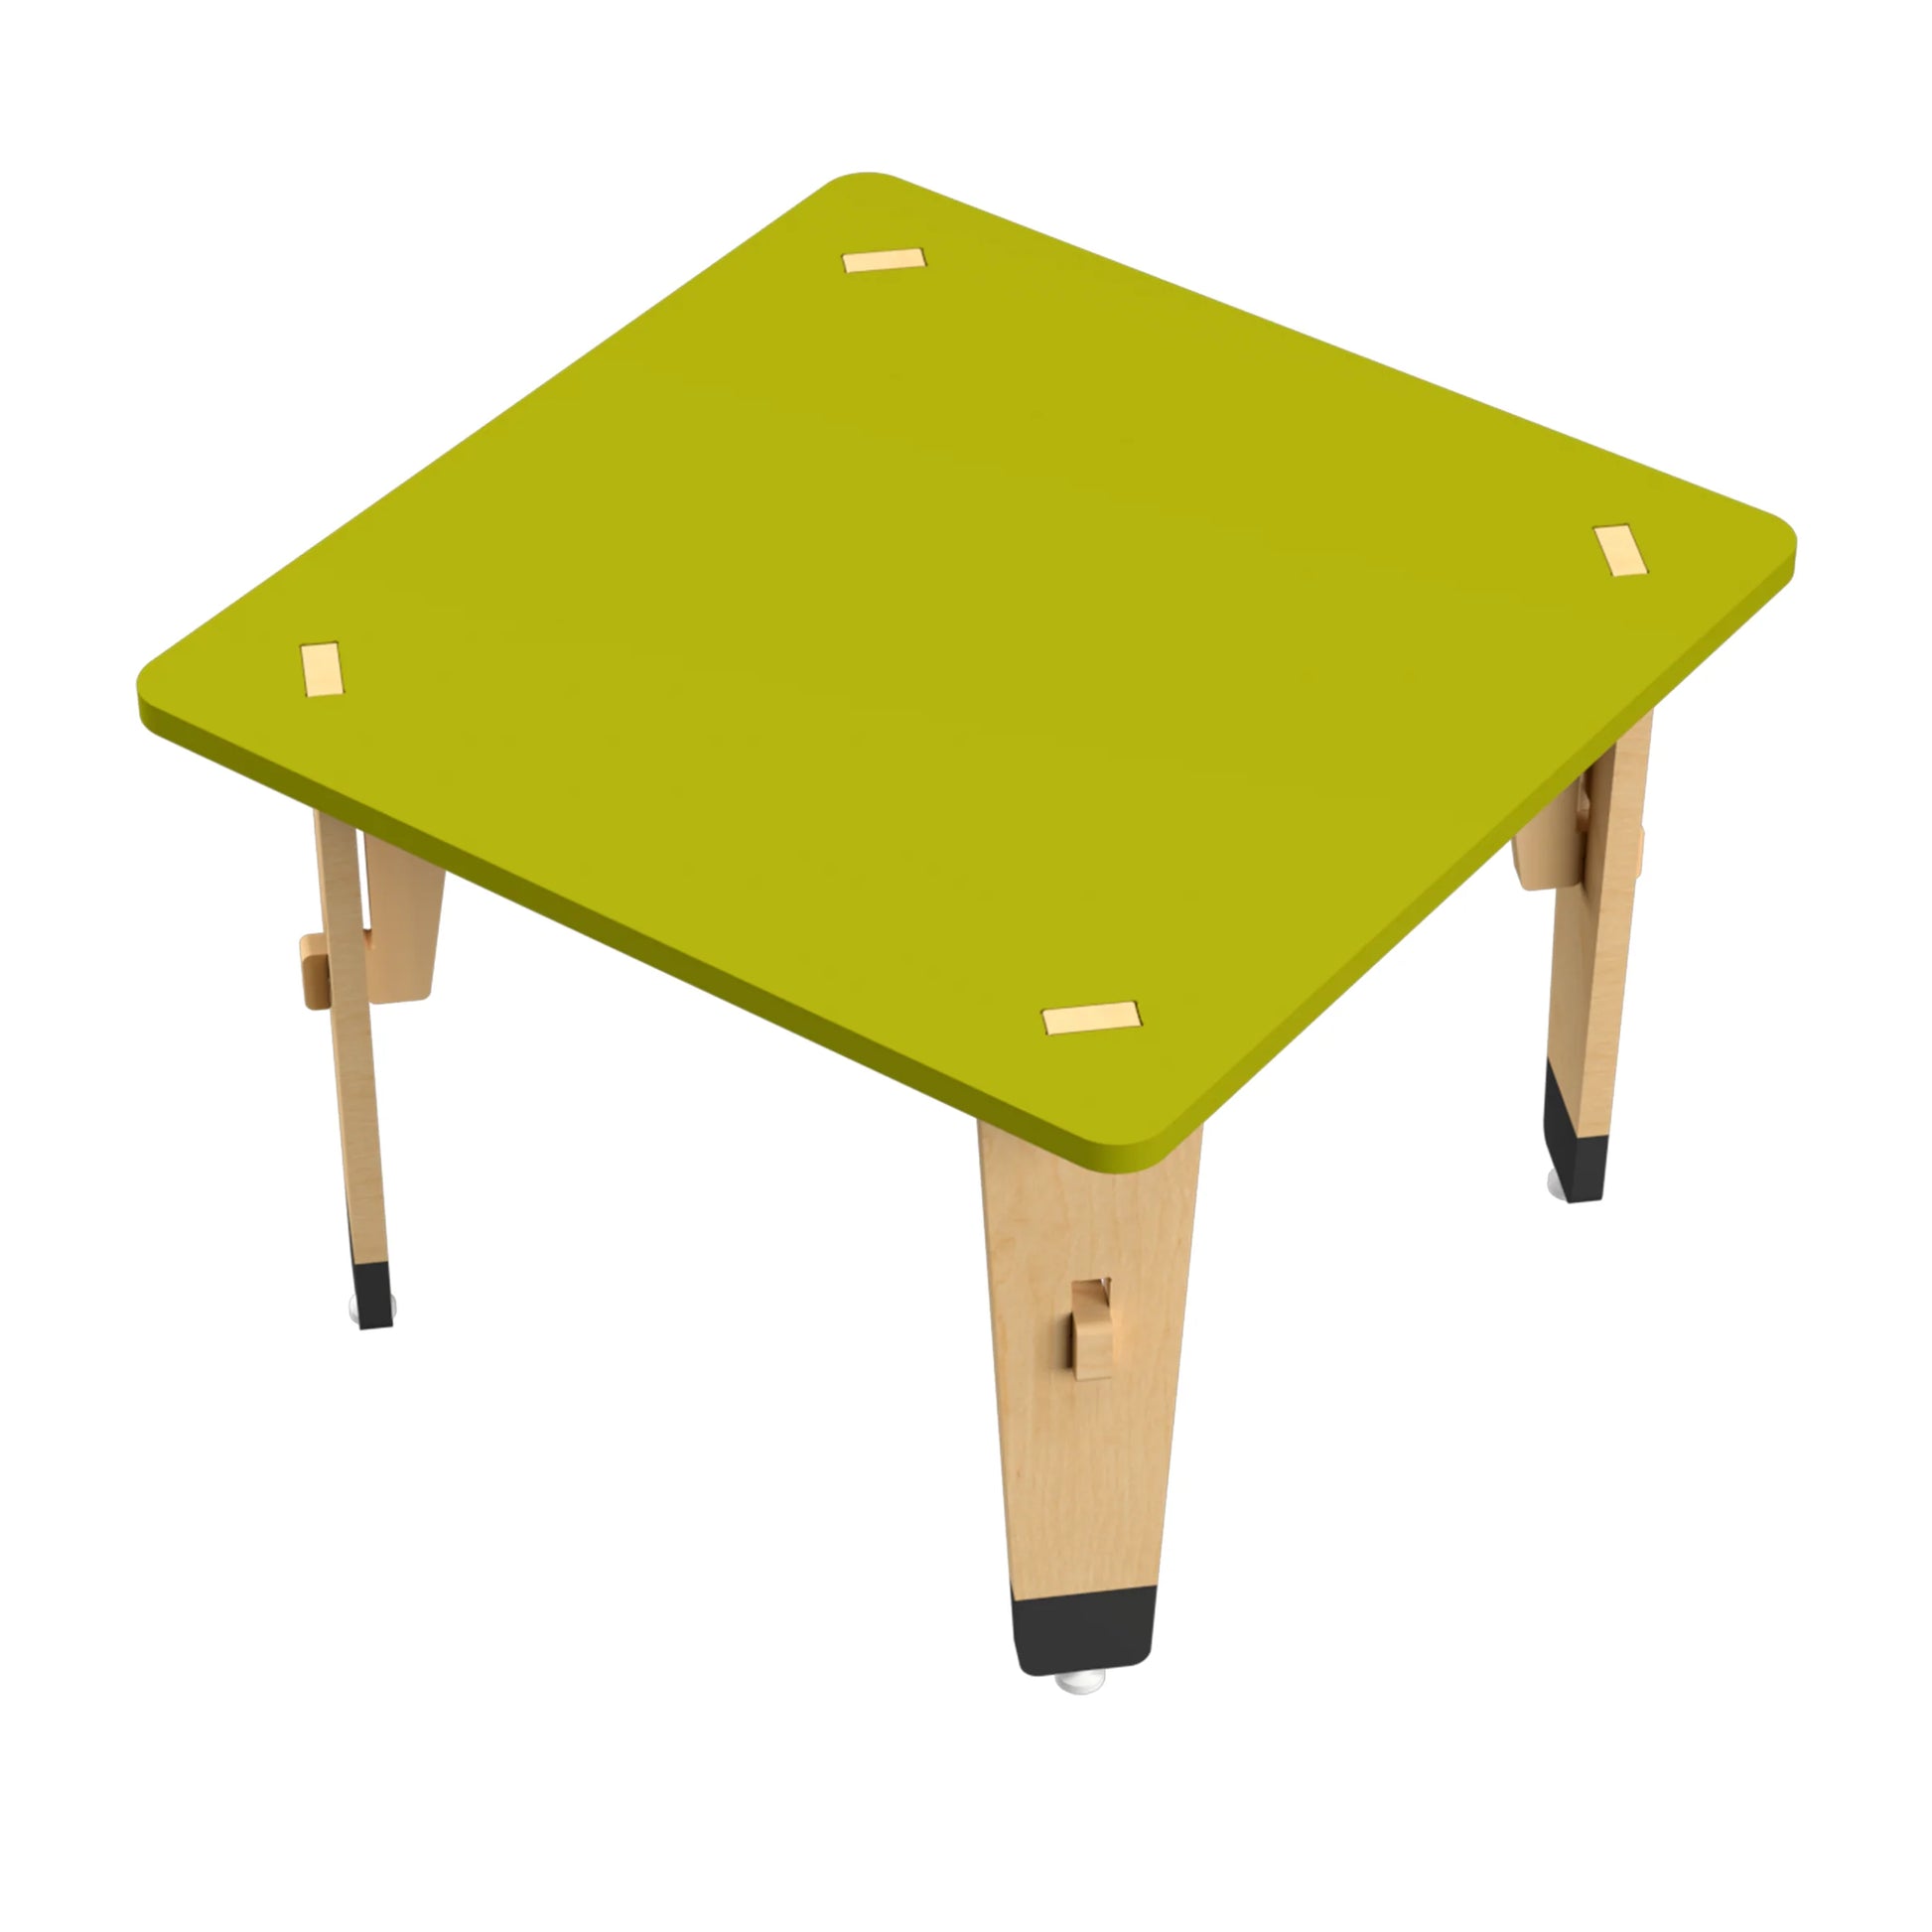 Buy Lime Fig Wooden Table - Green (15 Inches) - Upper View - SkilloToys.com